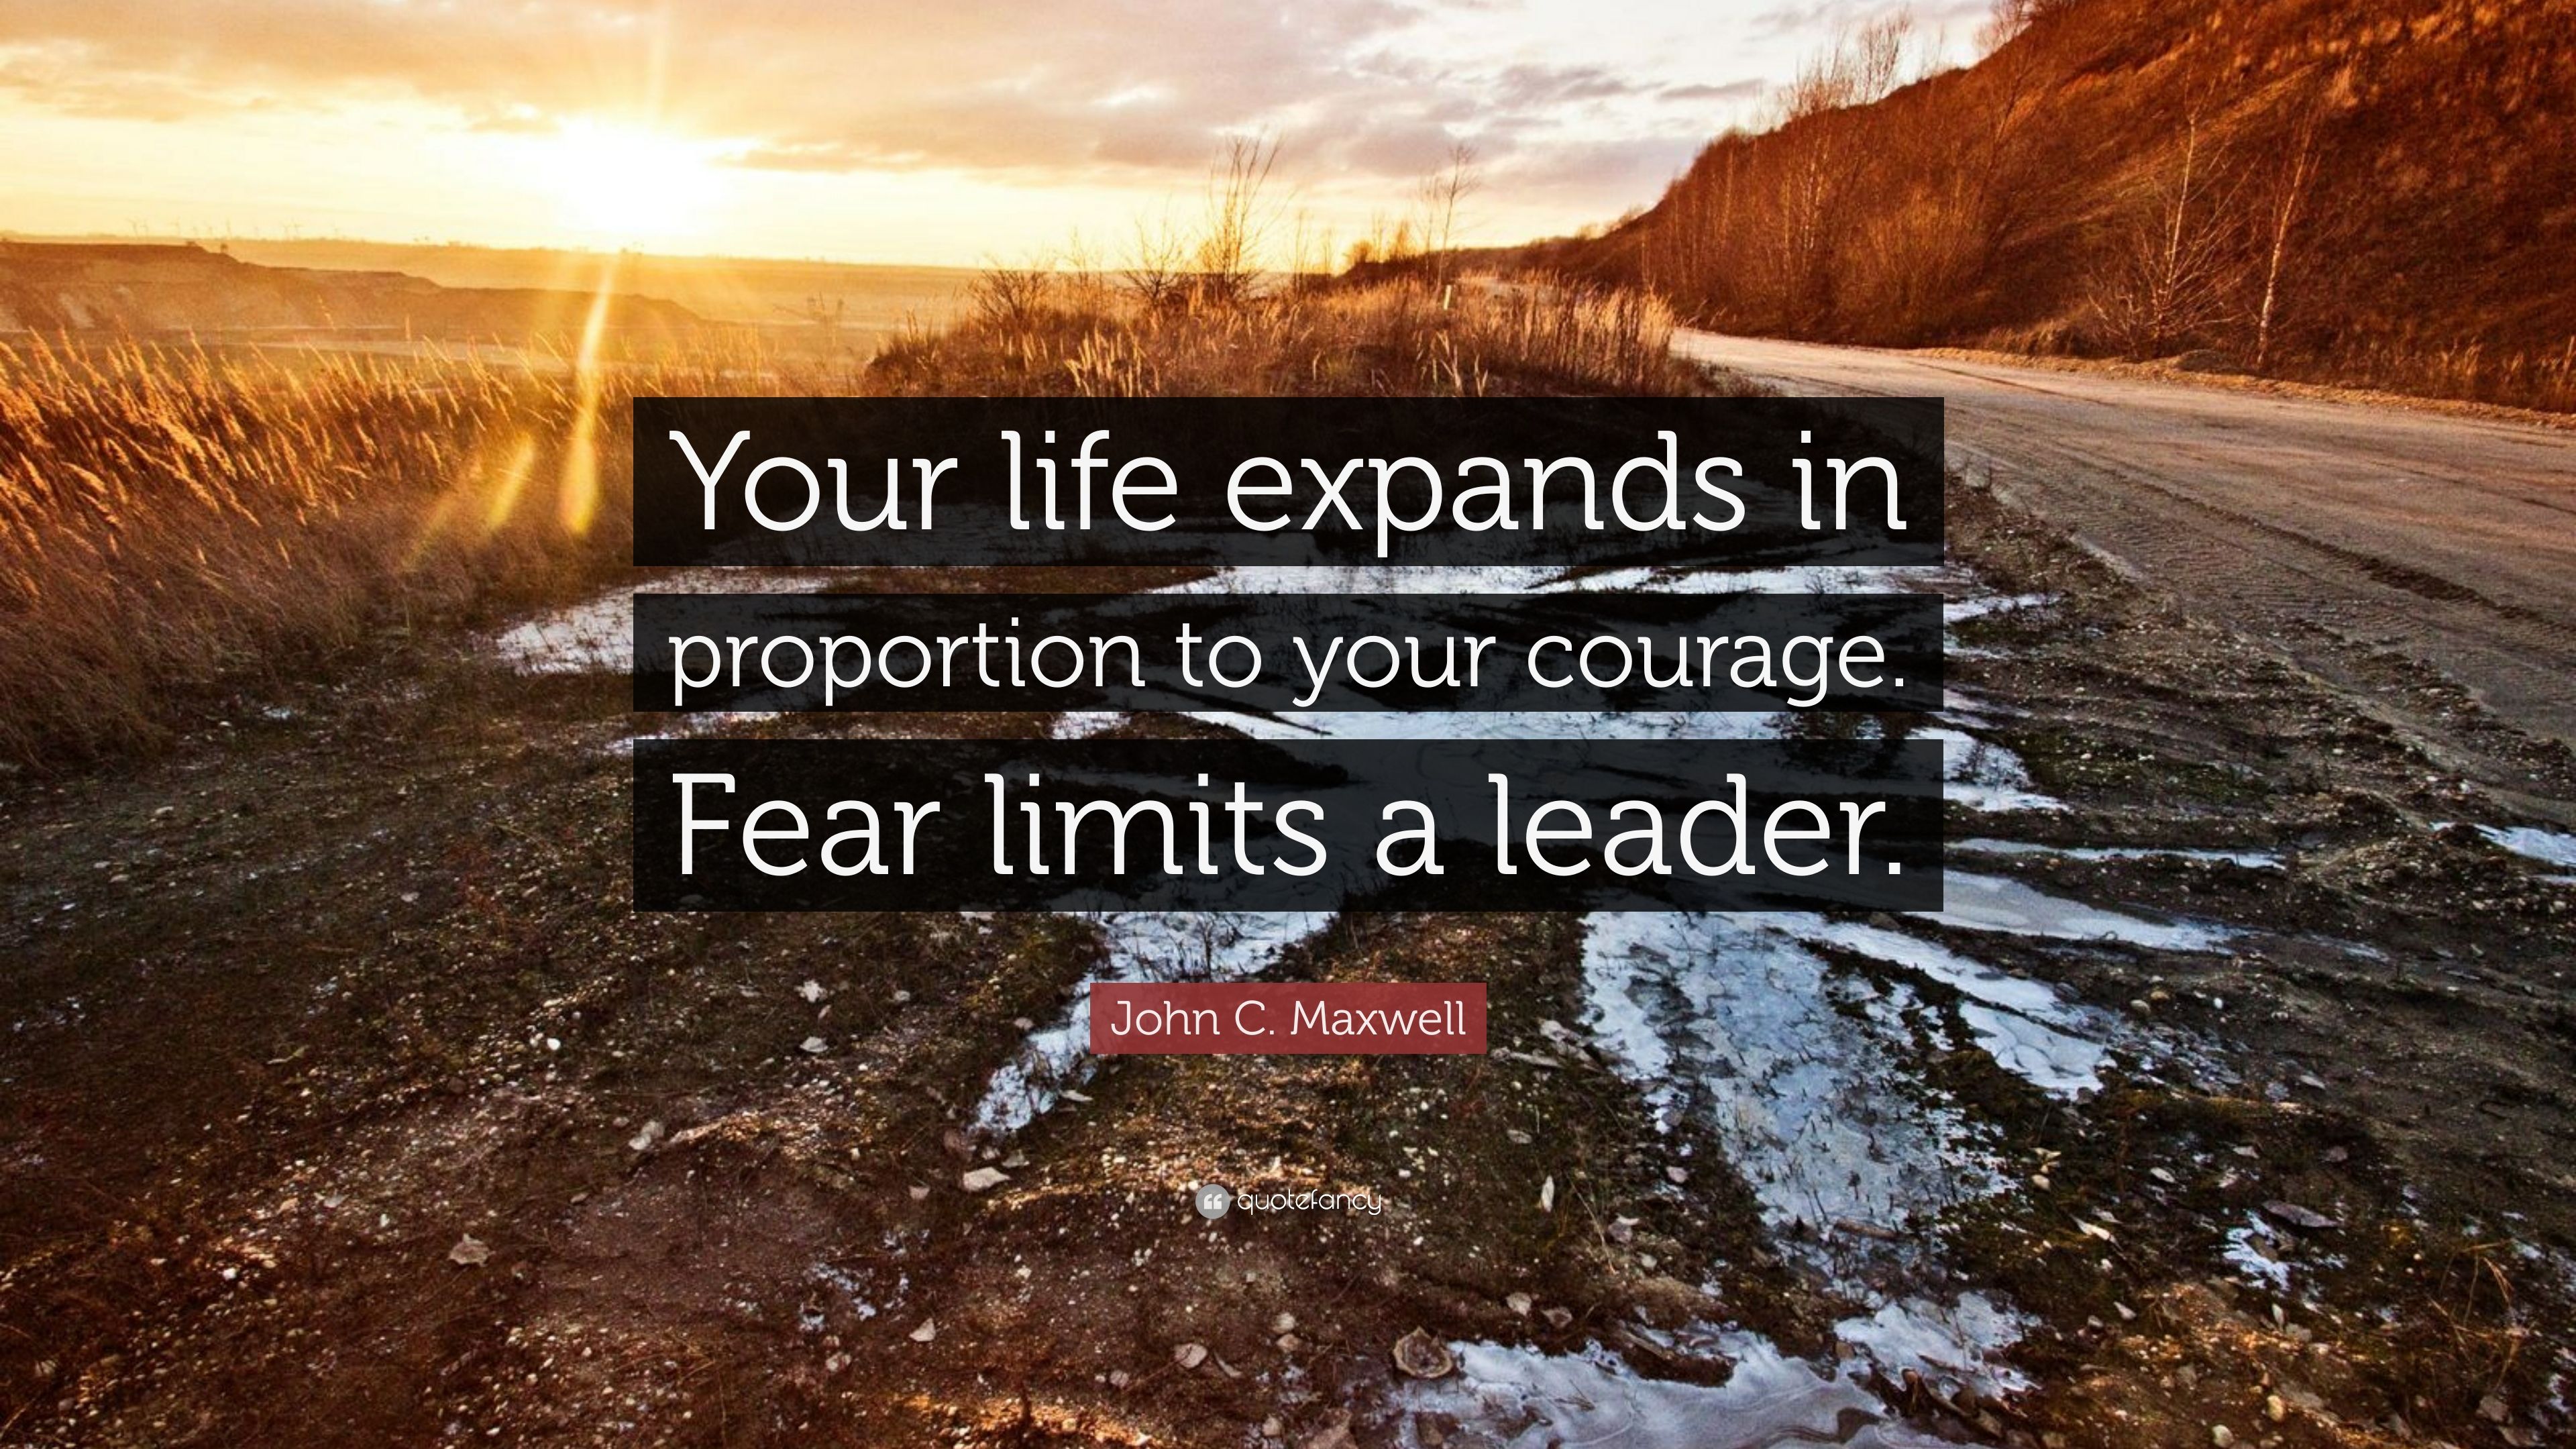 John C. Maxwell Quote: “Your life expands in proportion to your courage. Fear limits a leader.” (10 wallpaper)